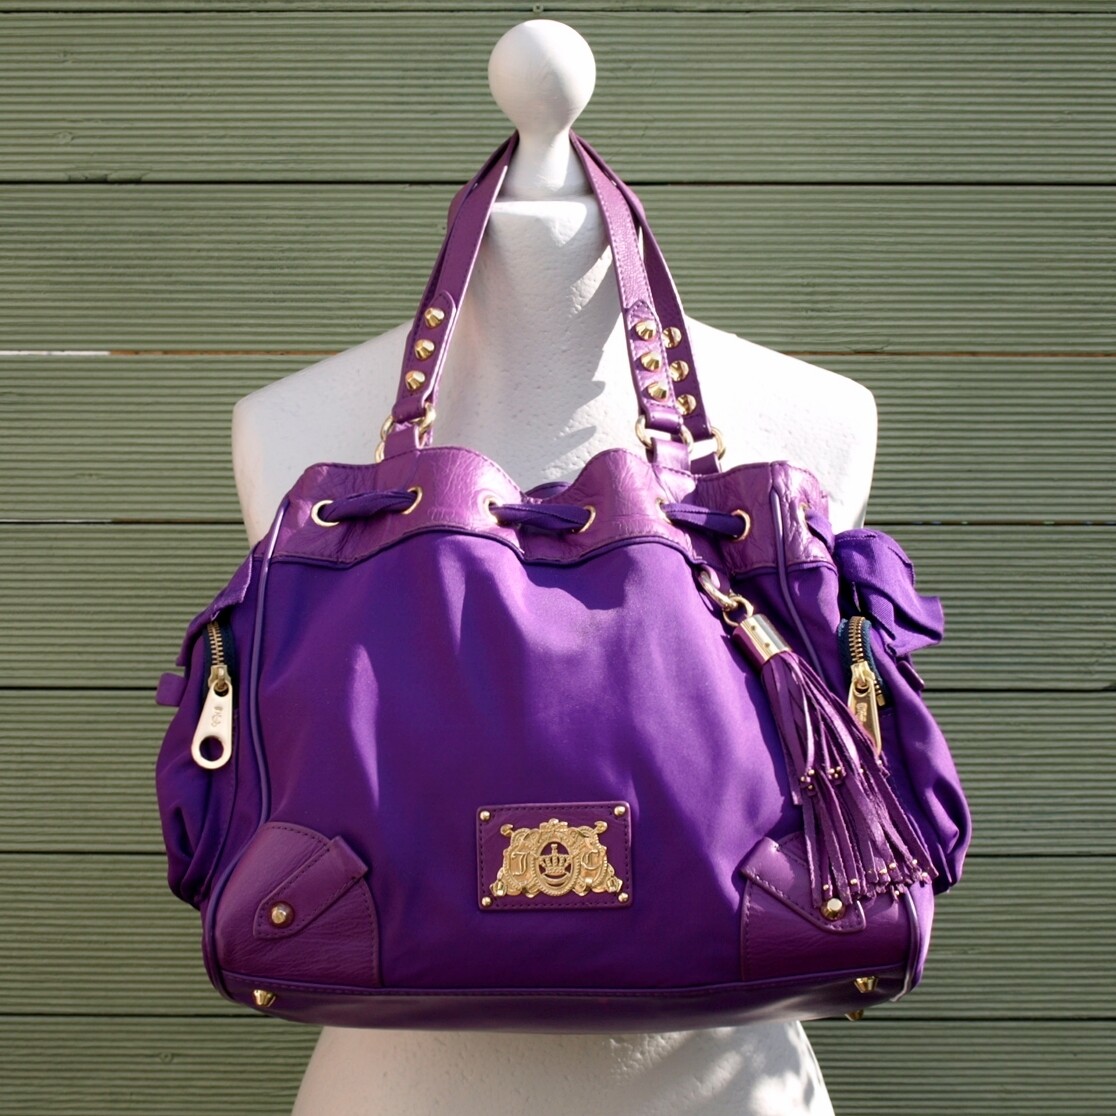 Purple Fabric & Leather Juicy Couture Shoulder Bag